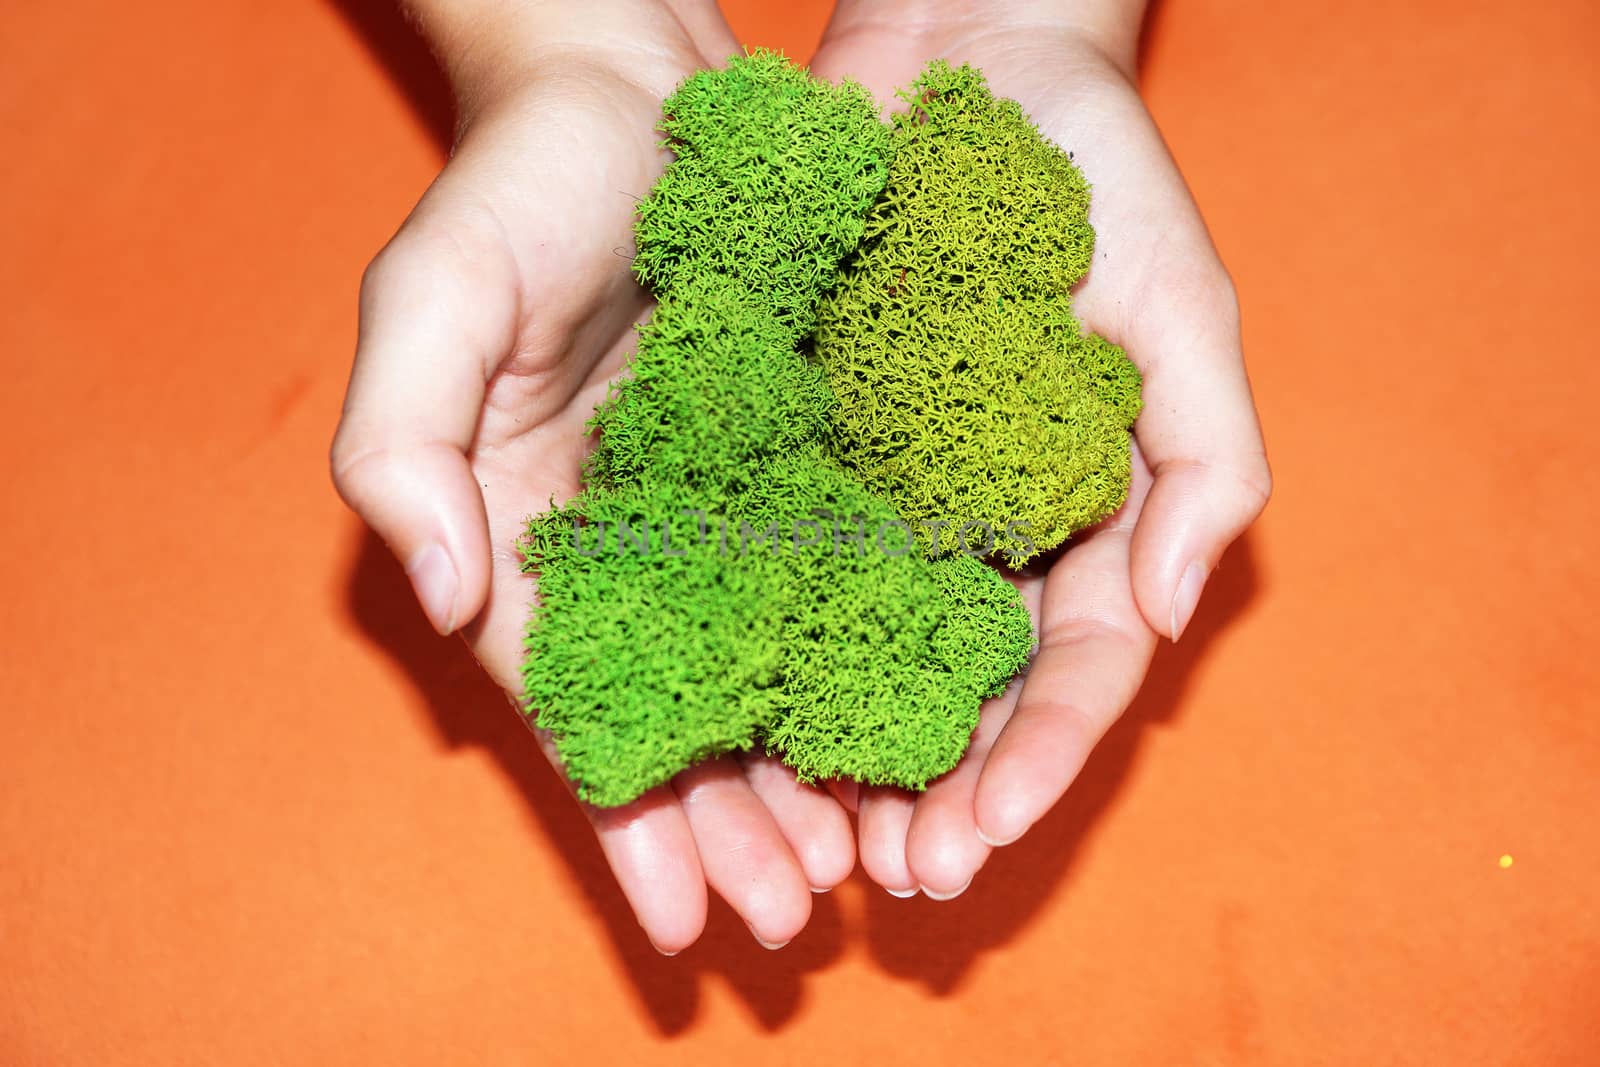 green stabilized moss in children's hands as a symbol of purity by Annado